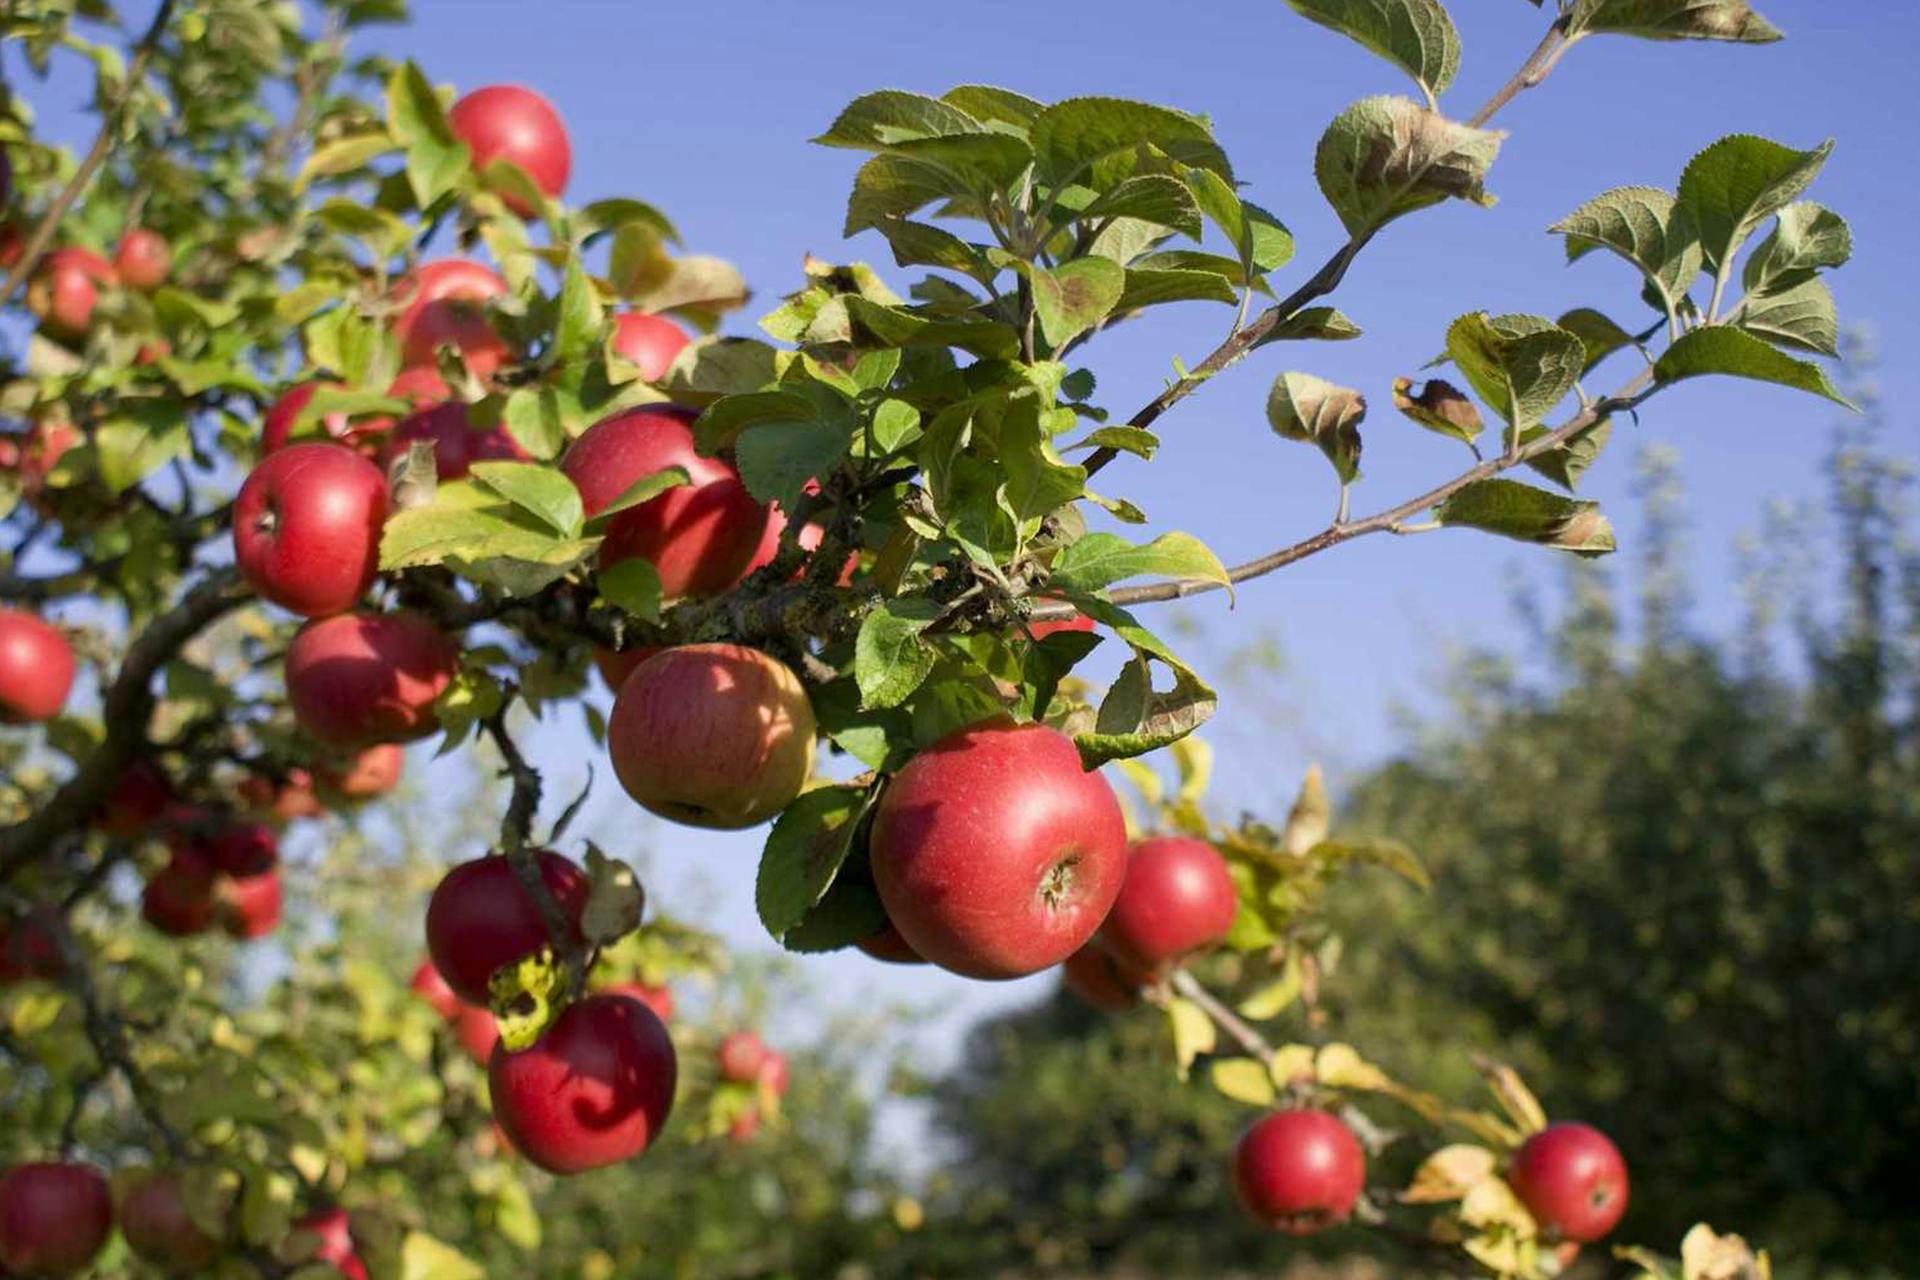 6 Fantastic Campgrounds for This Apple Picking Season